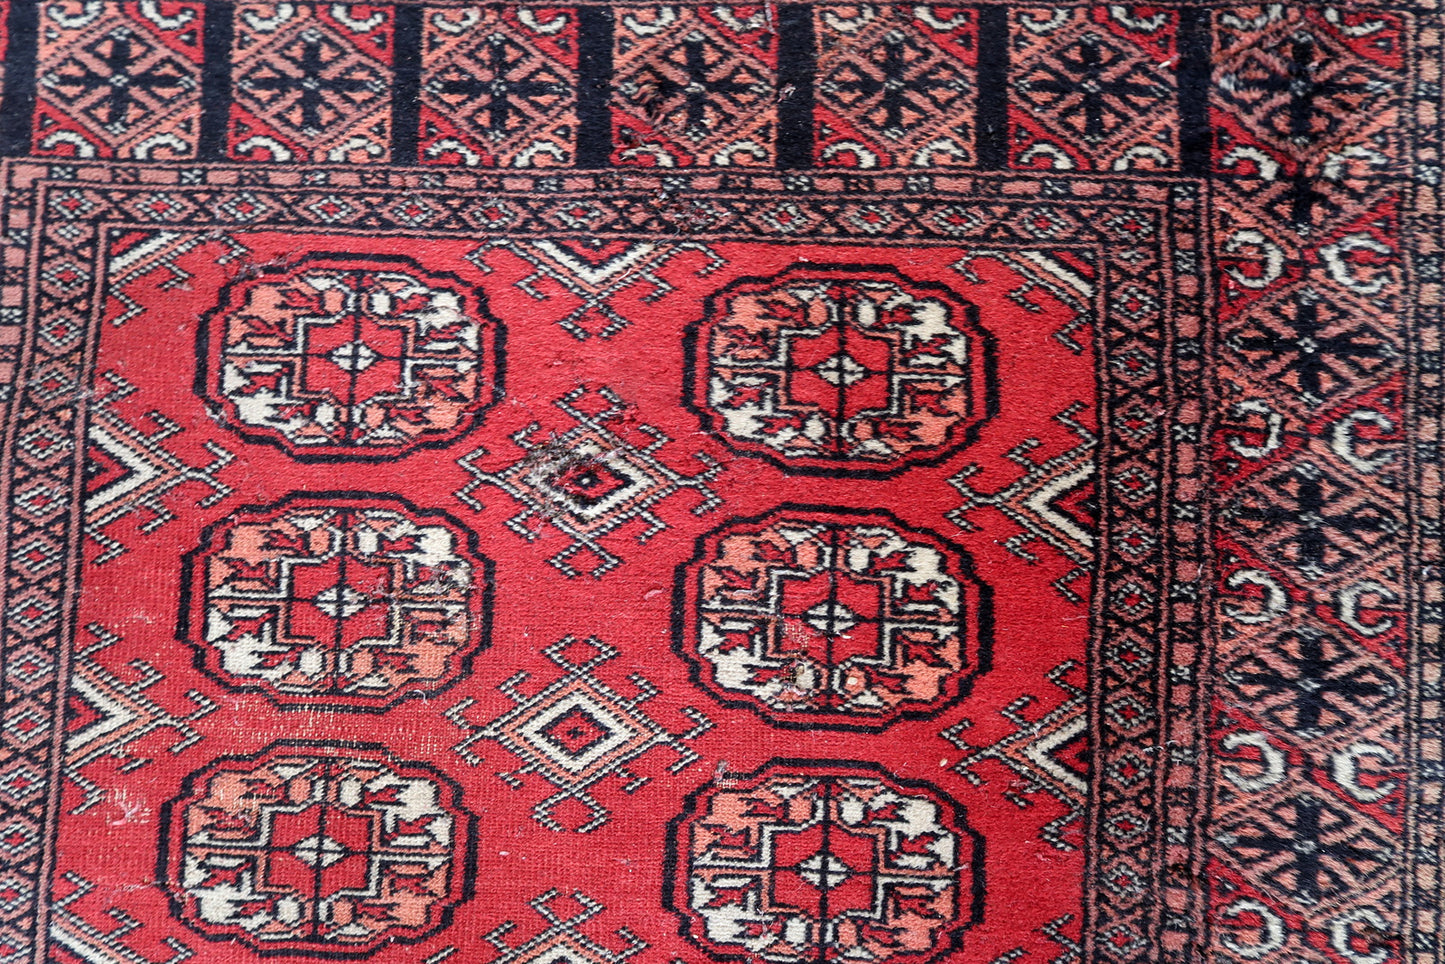 Intricate traditional design in beige and red.